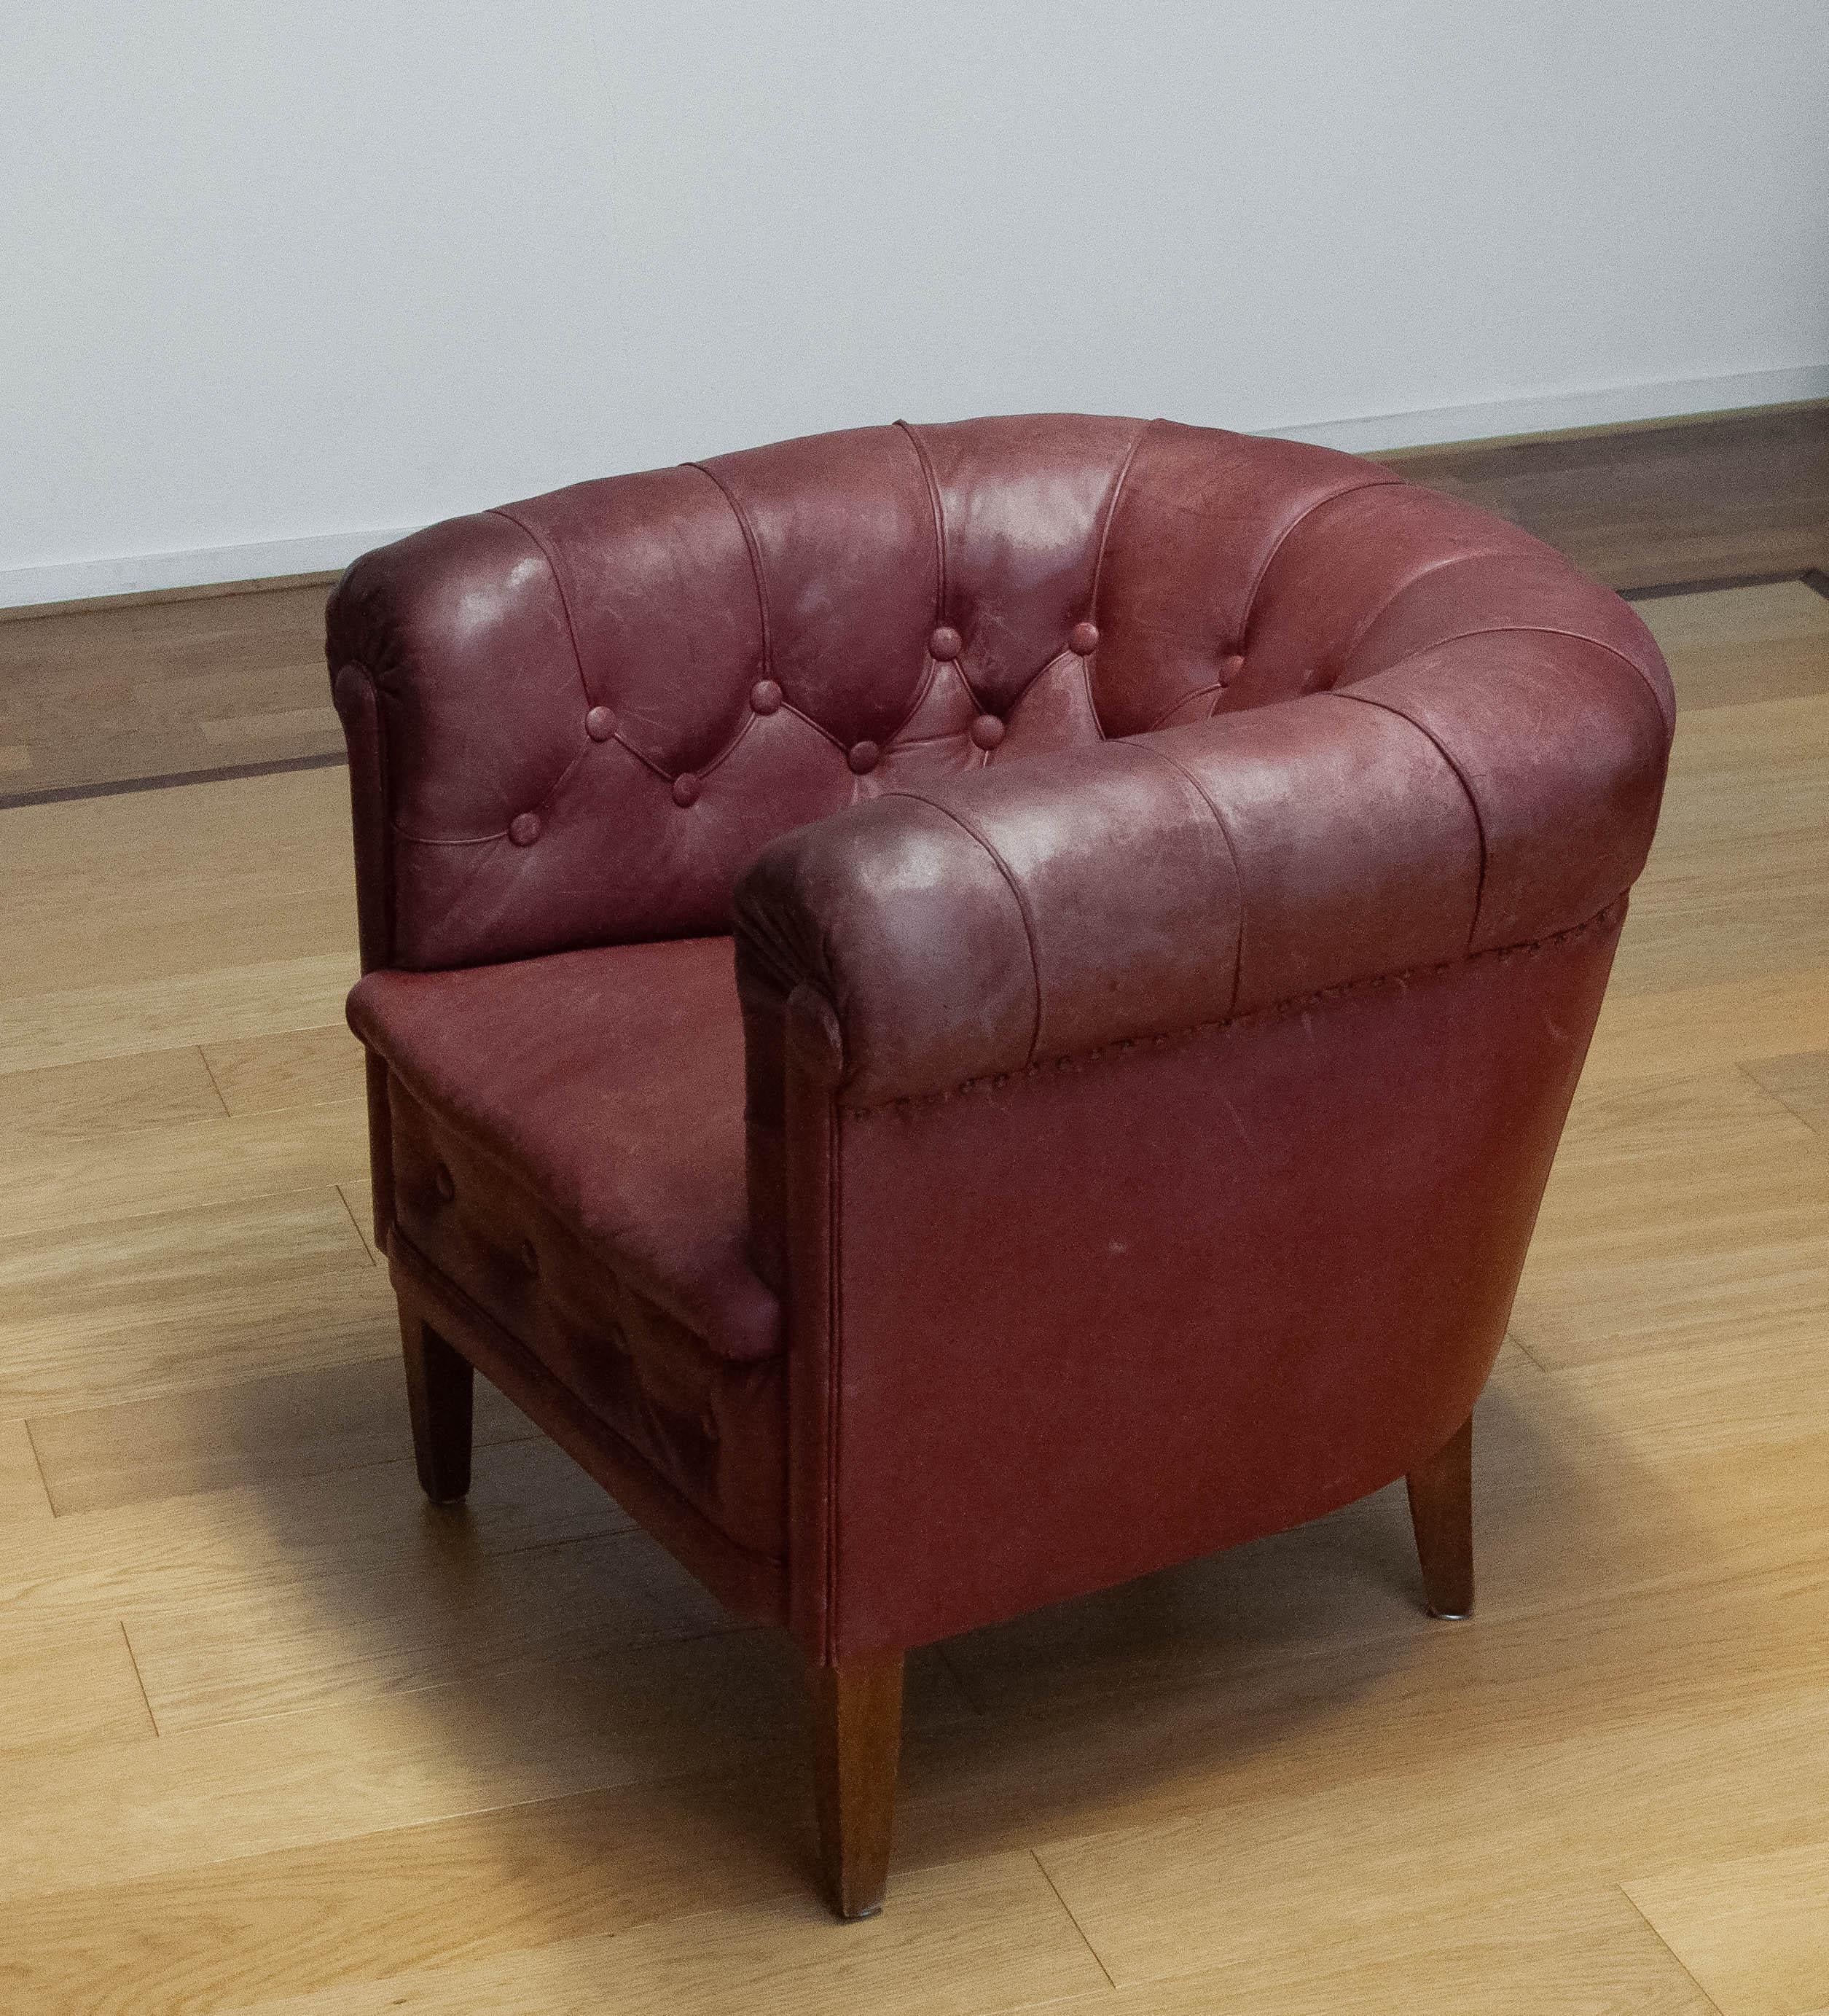 1930s Swedish Crimson Red Chesterfield Club Chair in Patinated Leather For Sale 1